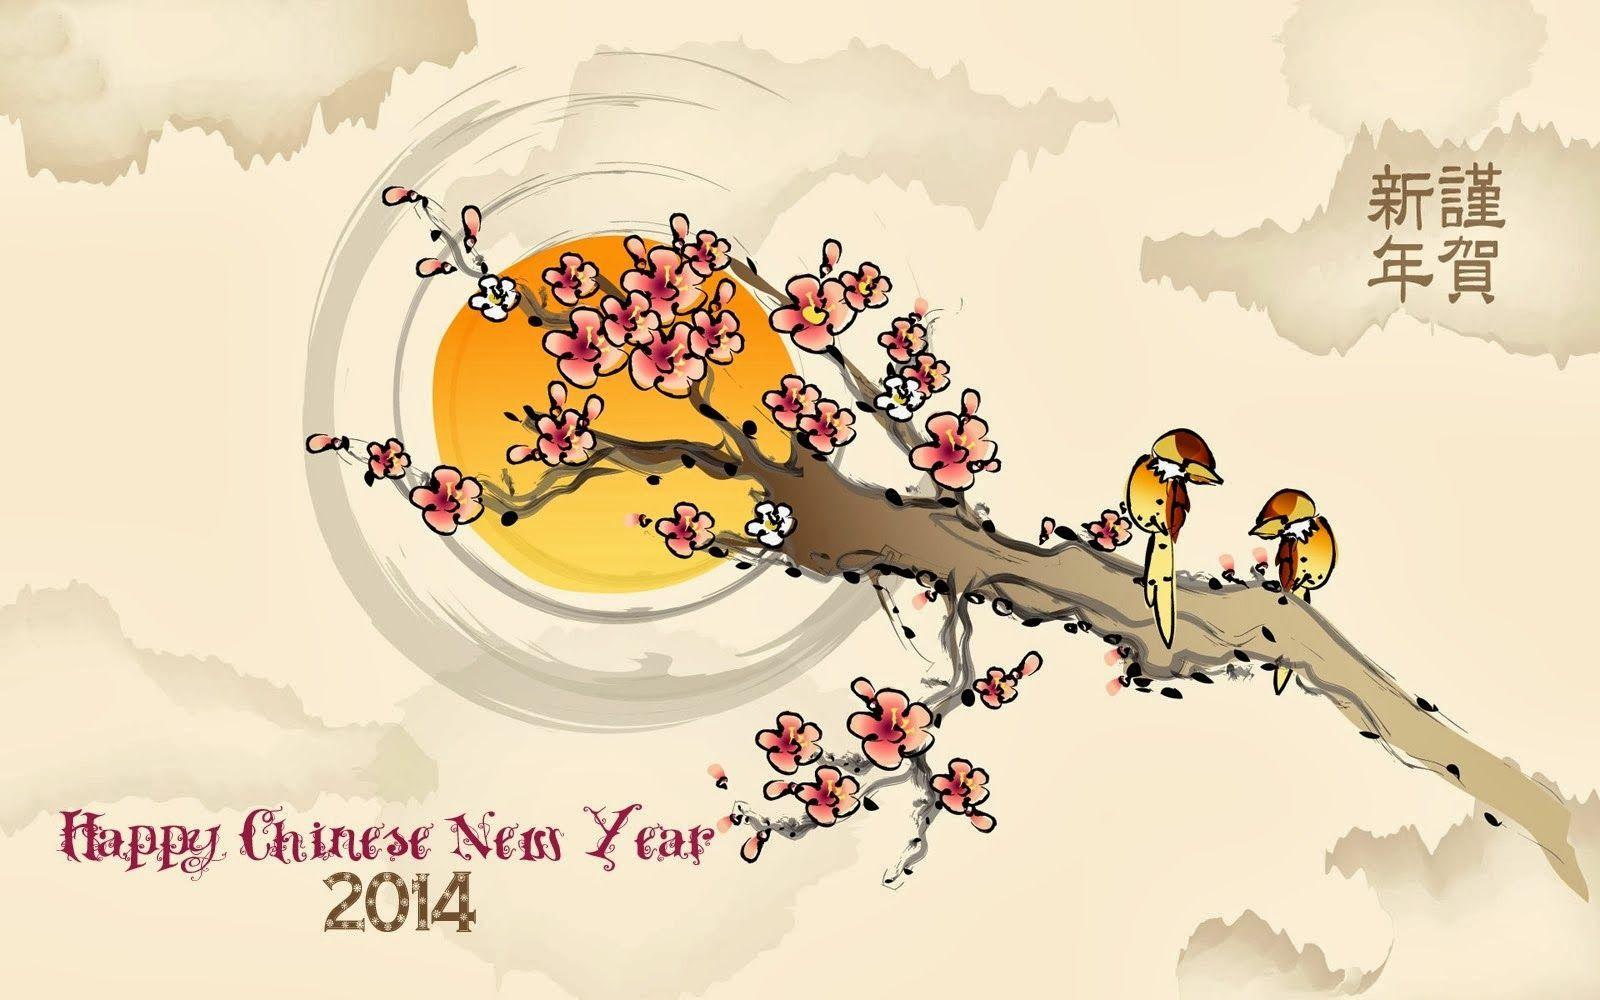 Happy New Year 2014 Wishes Wallpaper with Lunar New Year Greeting